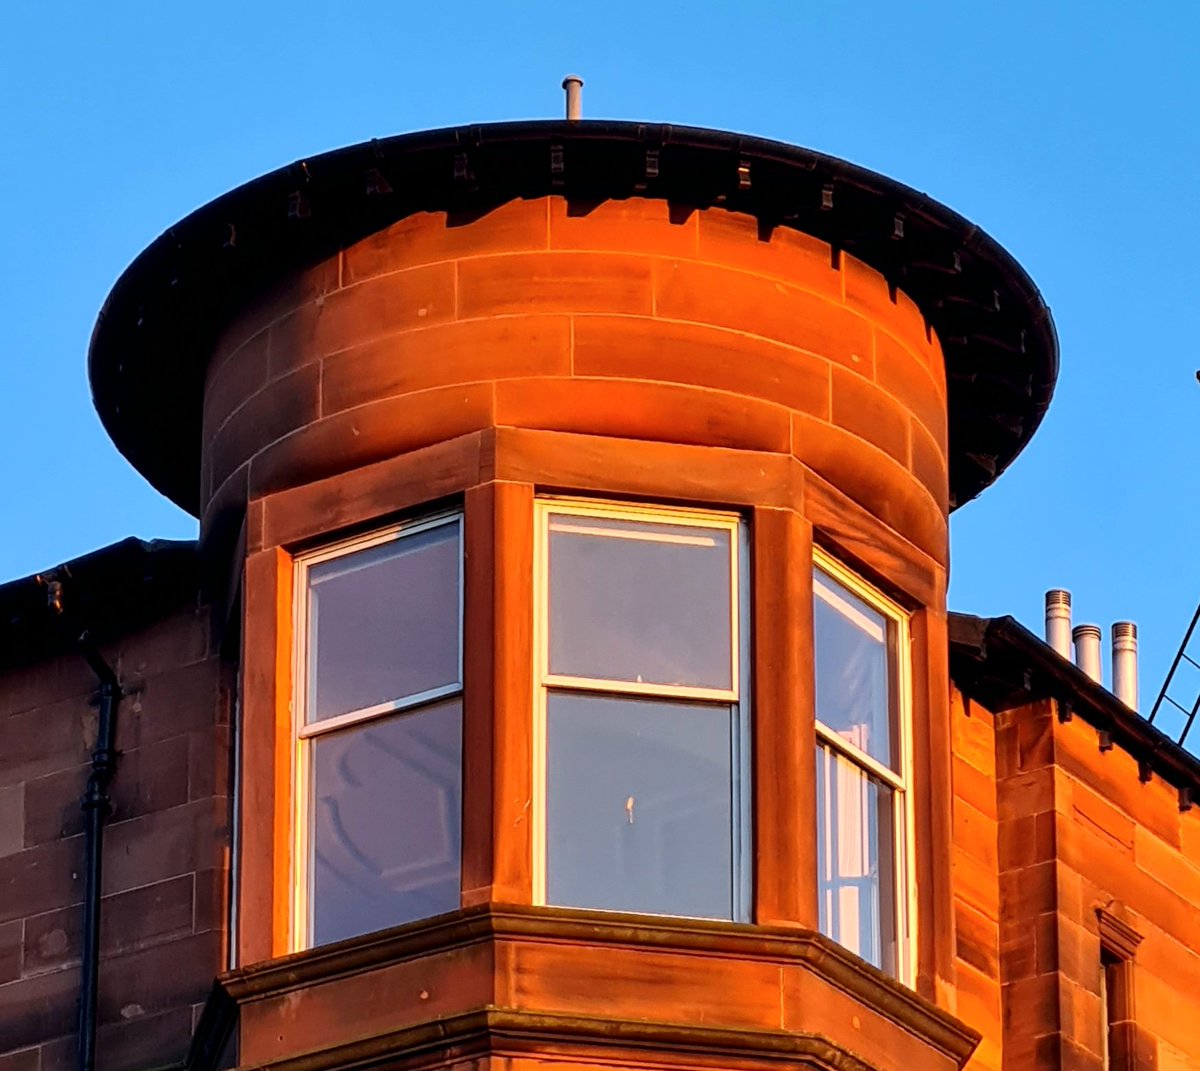 Top floor corner bay window of a red sandstone tenement in the Hyndland area of Glasgow glowing almost blood red in the last rays of tonight's setting sun.

#glasgow #architecture #glasgowbuildings #tenement #glasgowtenement #baywindow #redsandstone #hyndland #windowswednesday